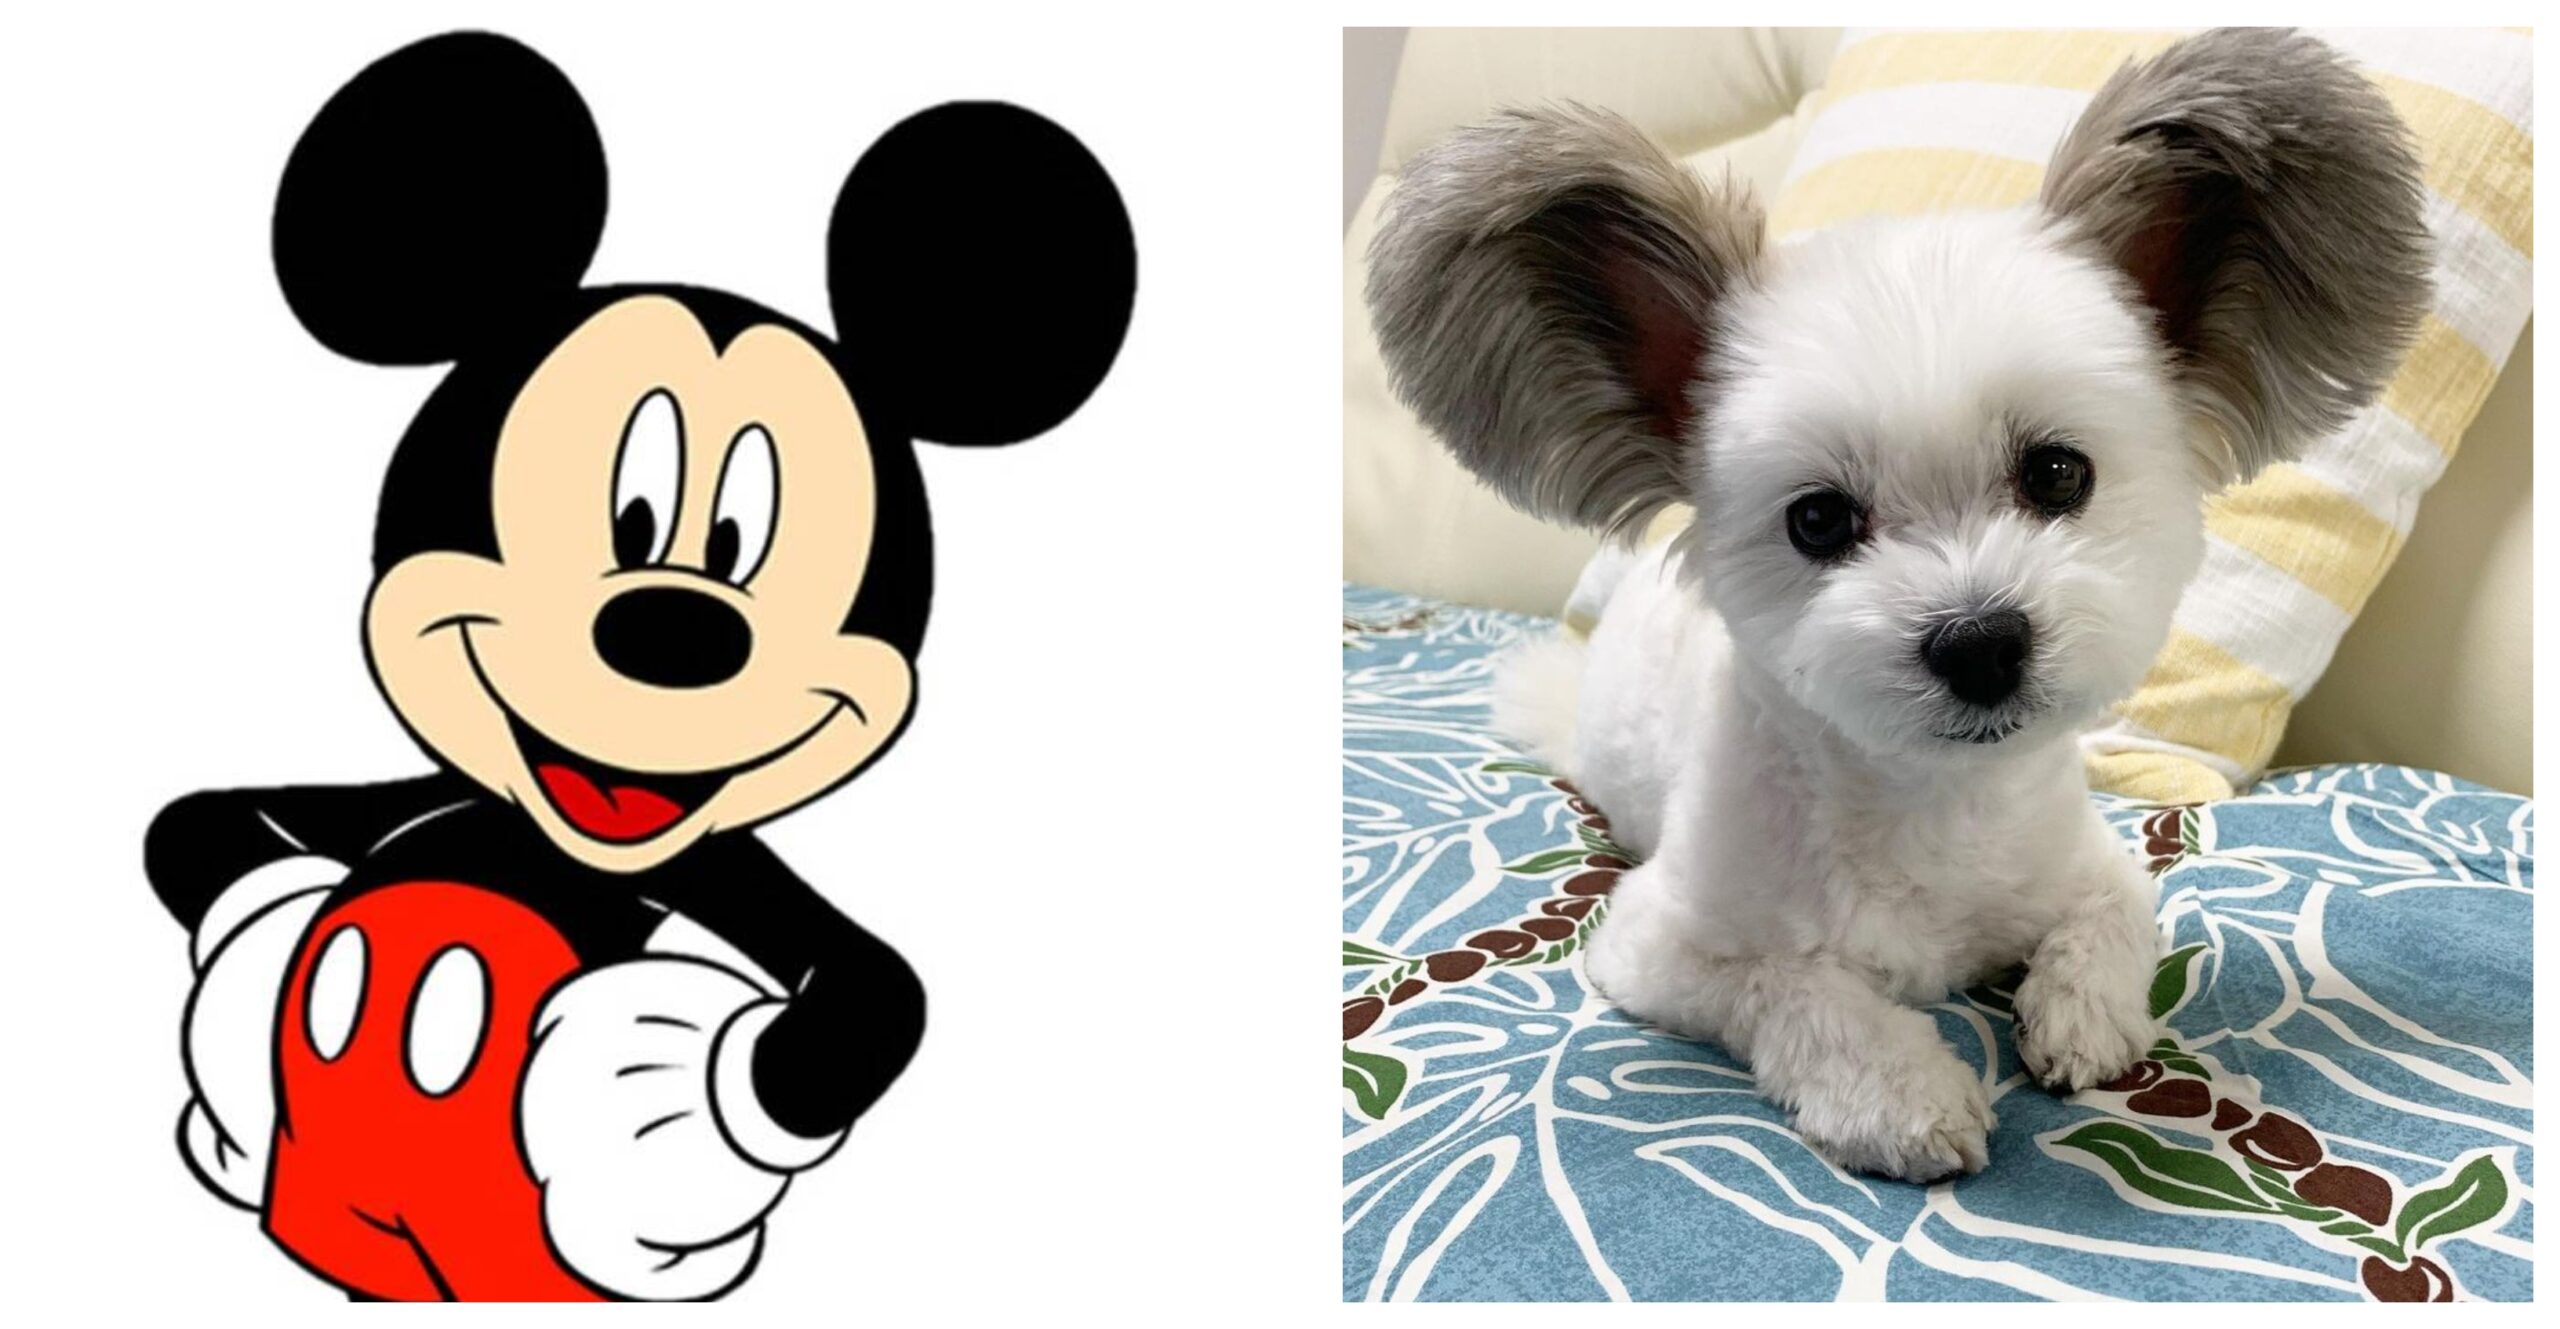 This super cute dog reminds us of Mickey Mouse